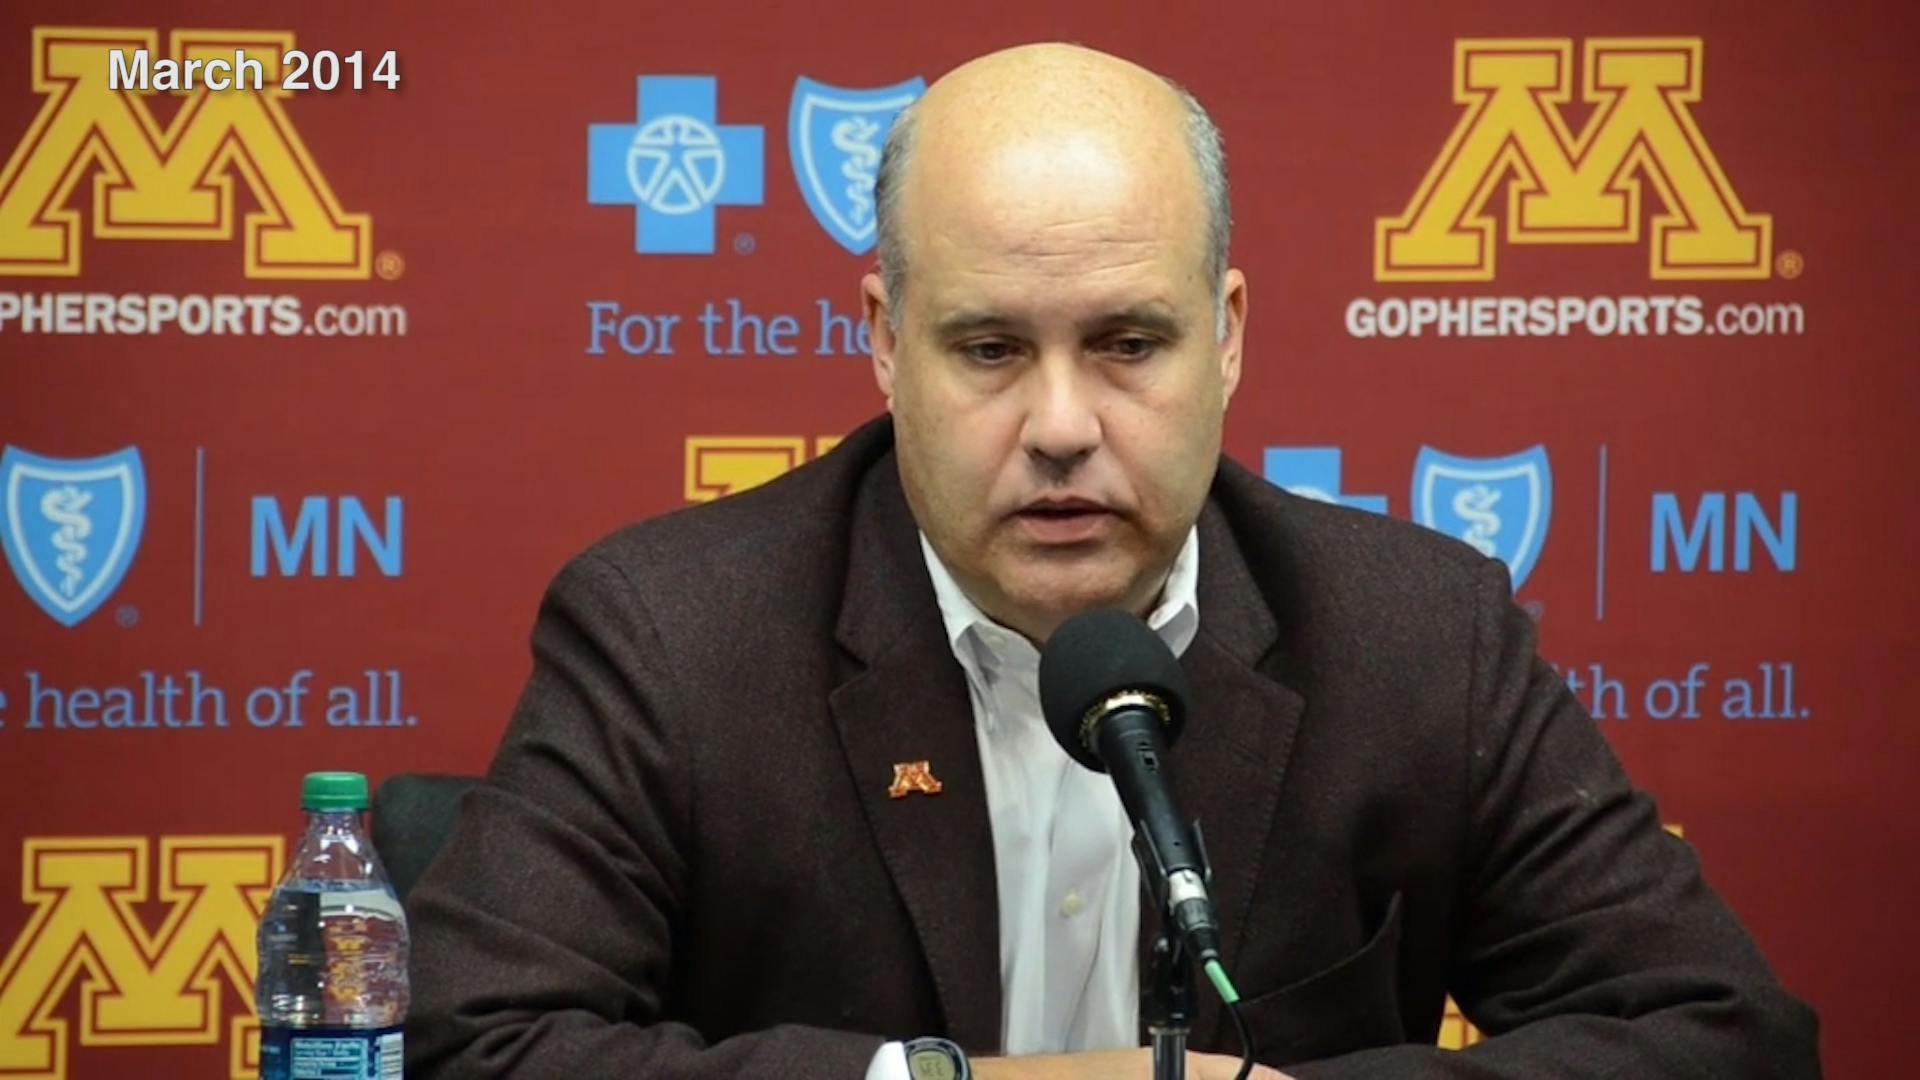 Former University of Minnesota athletic director Norwood Teague resigned and acknowledged sending "inappropriate texts" after drinking at a recent university-sponsored event.